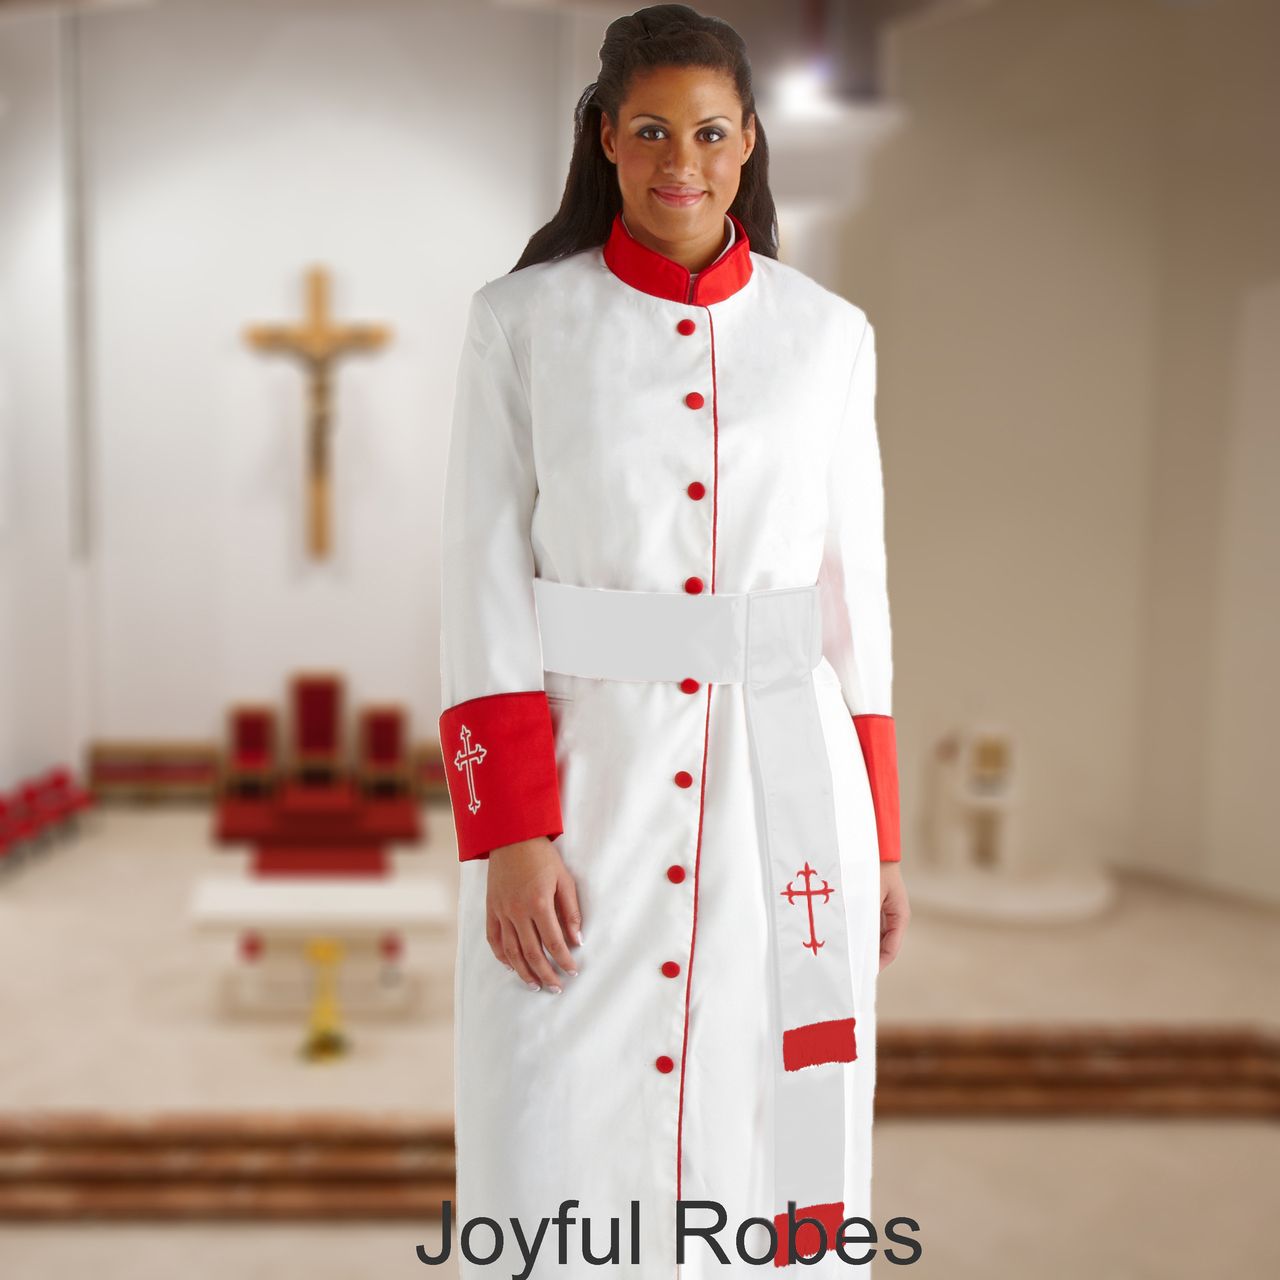 355 W. Women's Pastor/Clergy Robe - White/Red Cuff Matching Cincture Set